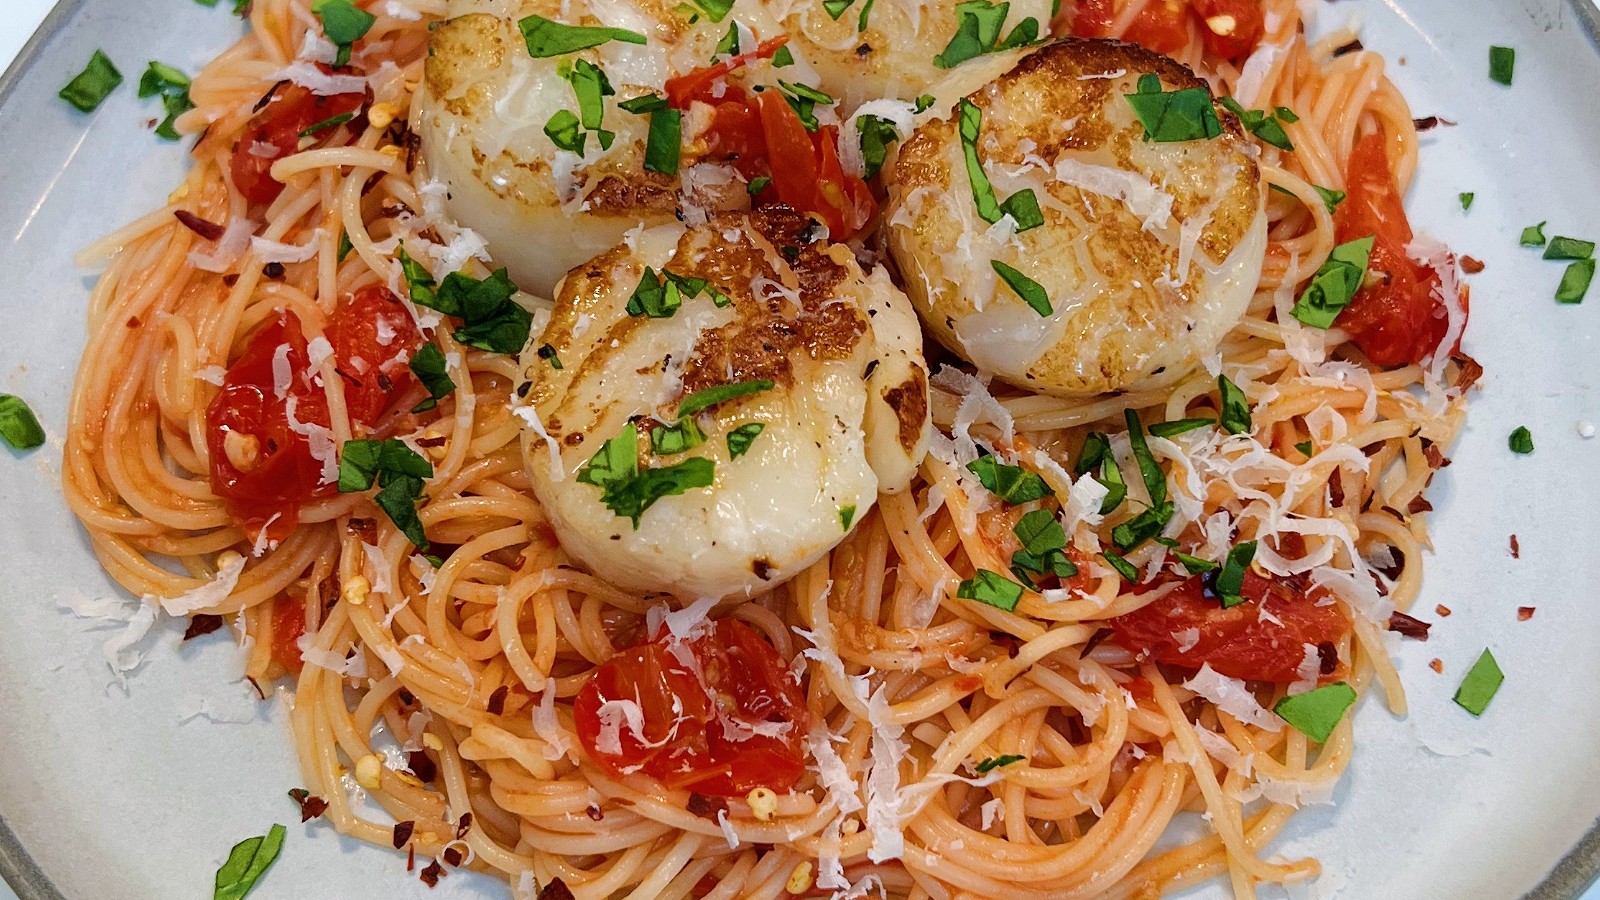 Image of Seared Scallop Pasta with Burst Tomatoes and Parsley